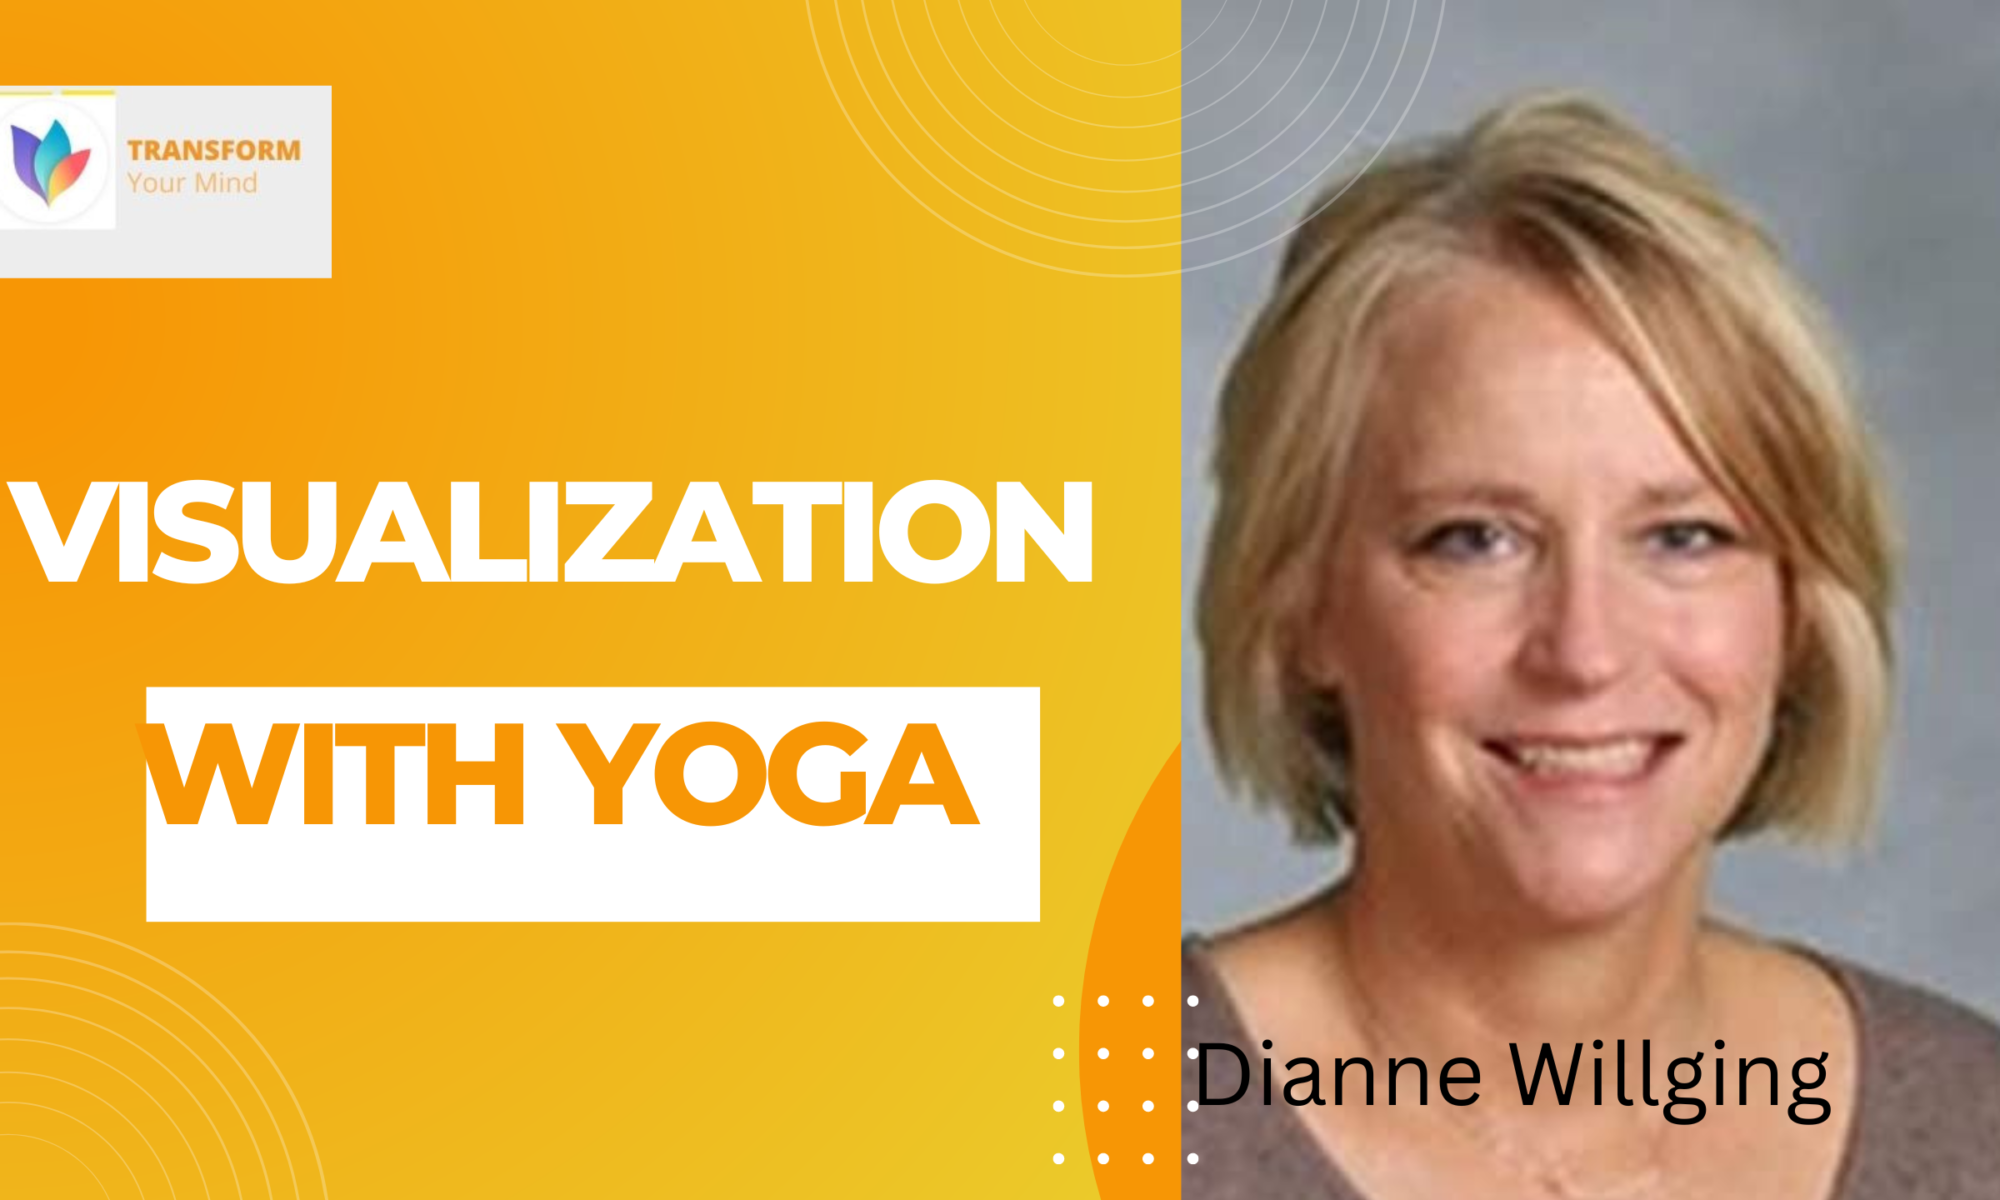 Dianne Willging Yoga and visualization